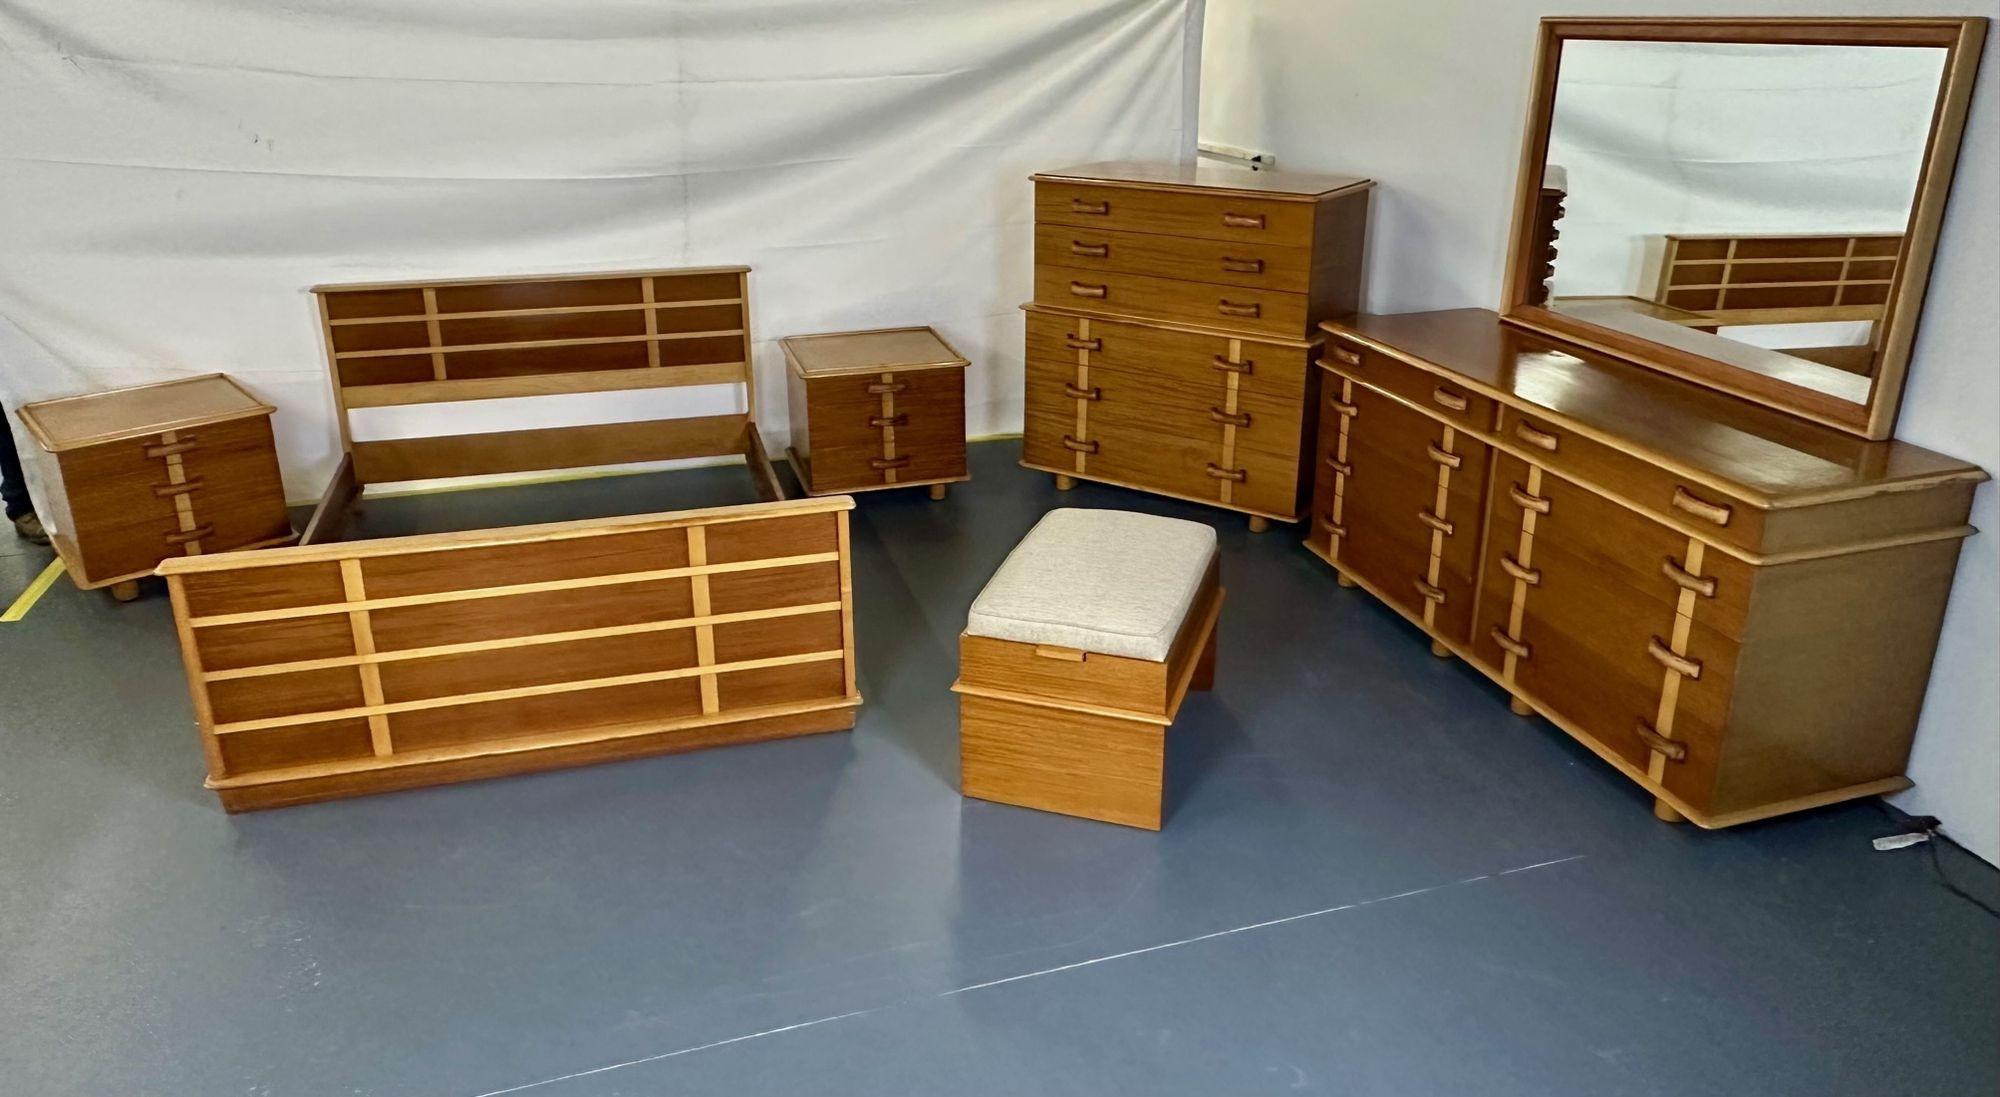 Rare Mid-Century Modern Paul Frankl for John Stuart complete 1950s bedroom set.
Paul Frankl for Johnson Furniture Co. and retailed by John Stuart. Branded Johnson Furniture Co. and labeled John Stuart to drawer interior. Stamped with manufacturer's